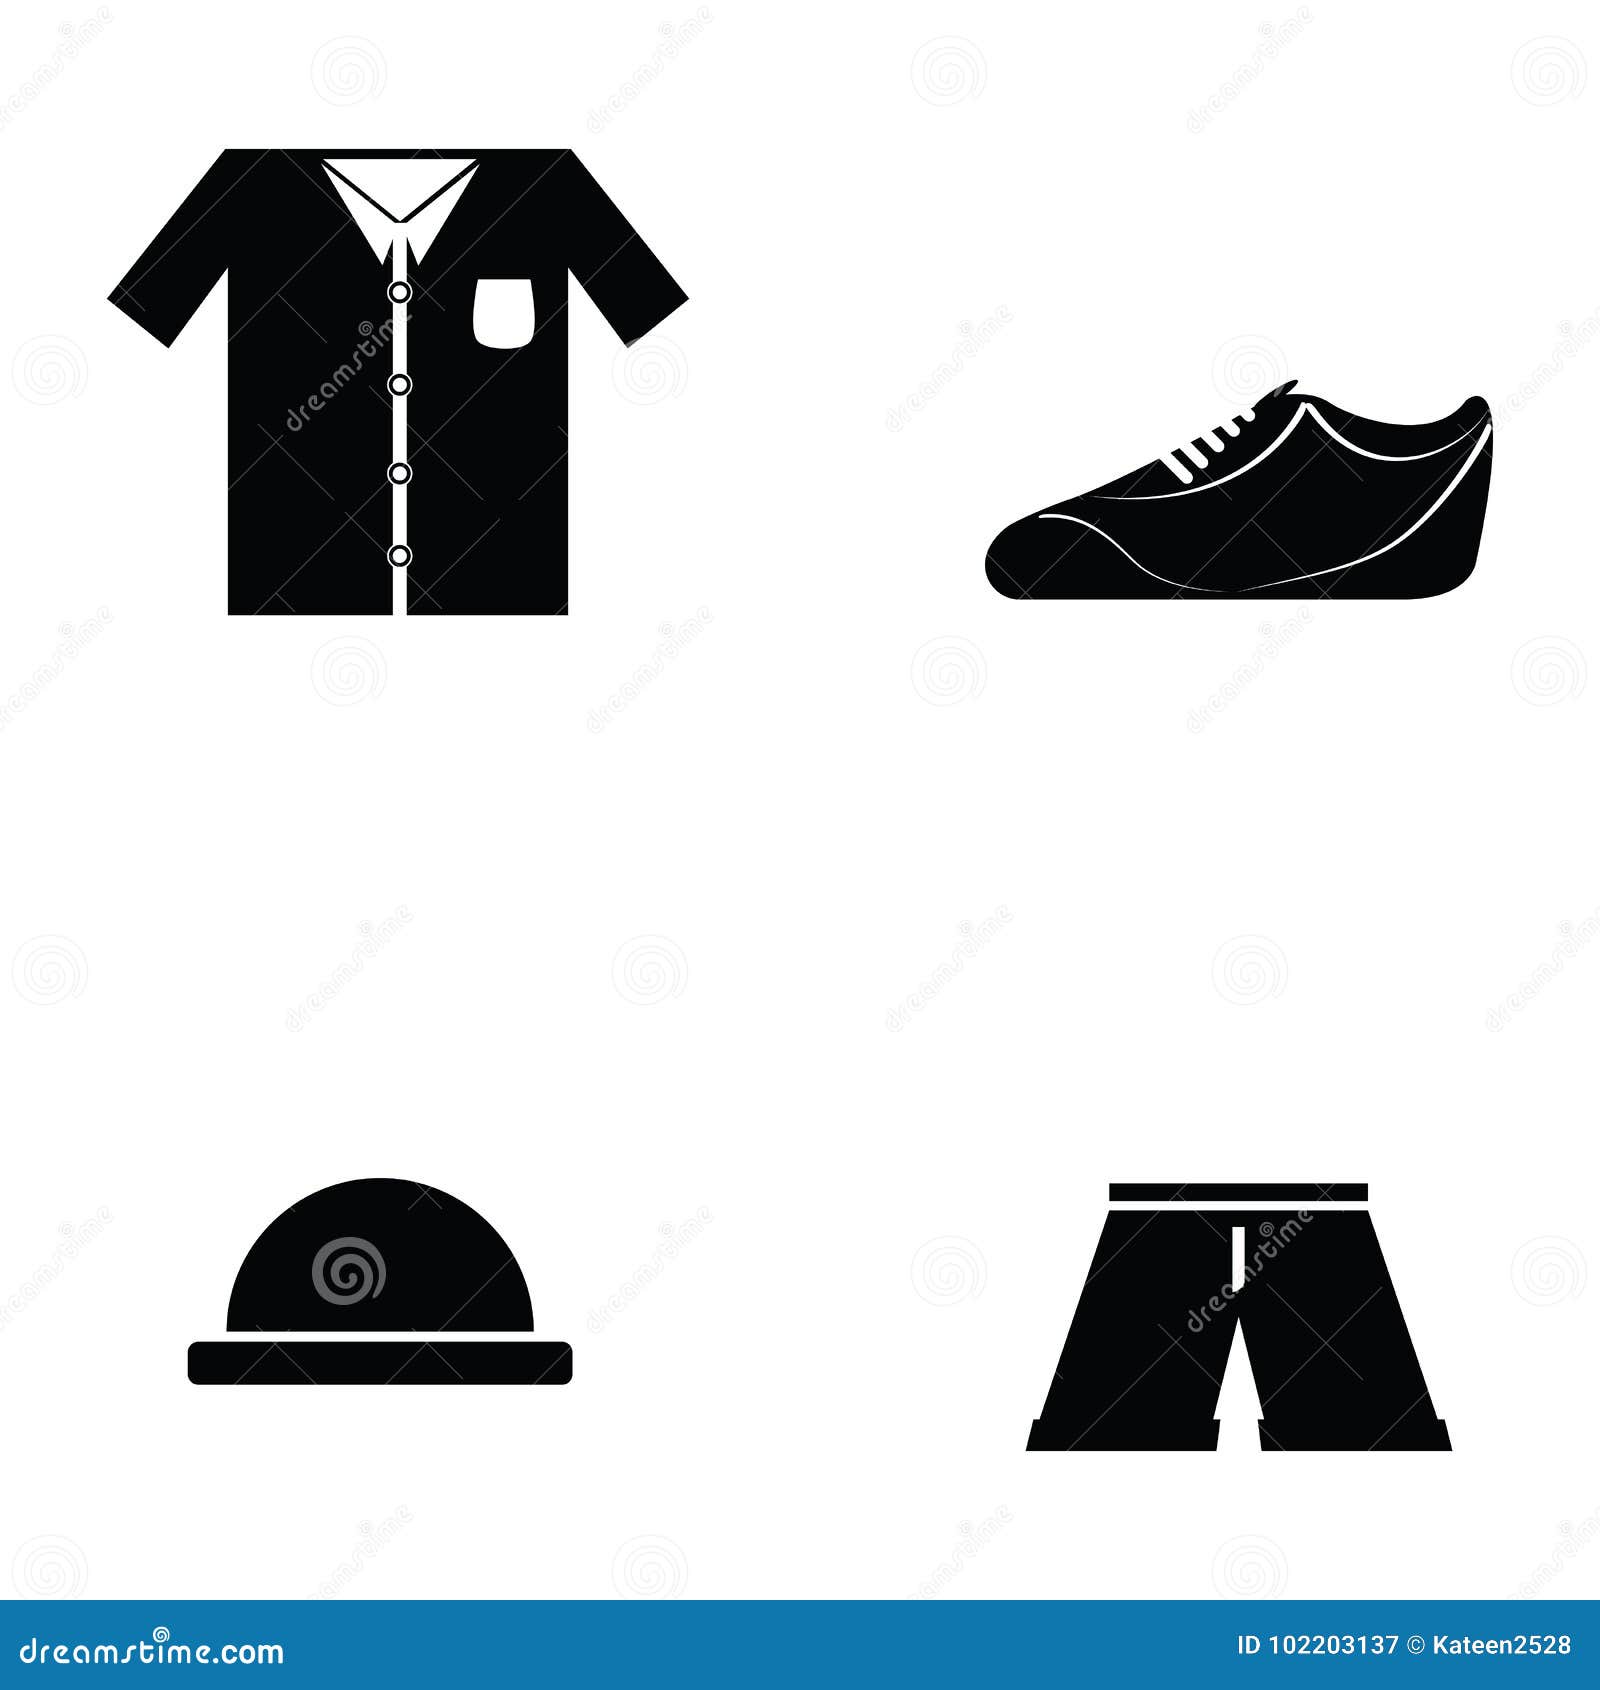 Clothes icon set stock vector. Illustration of line - 102203137